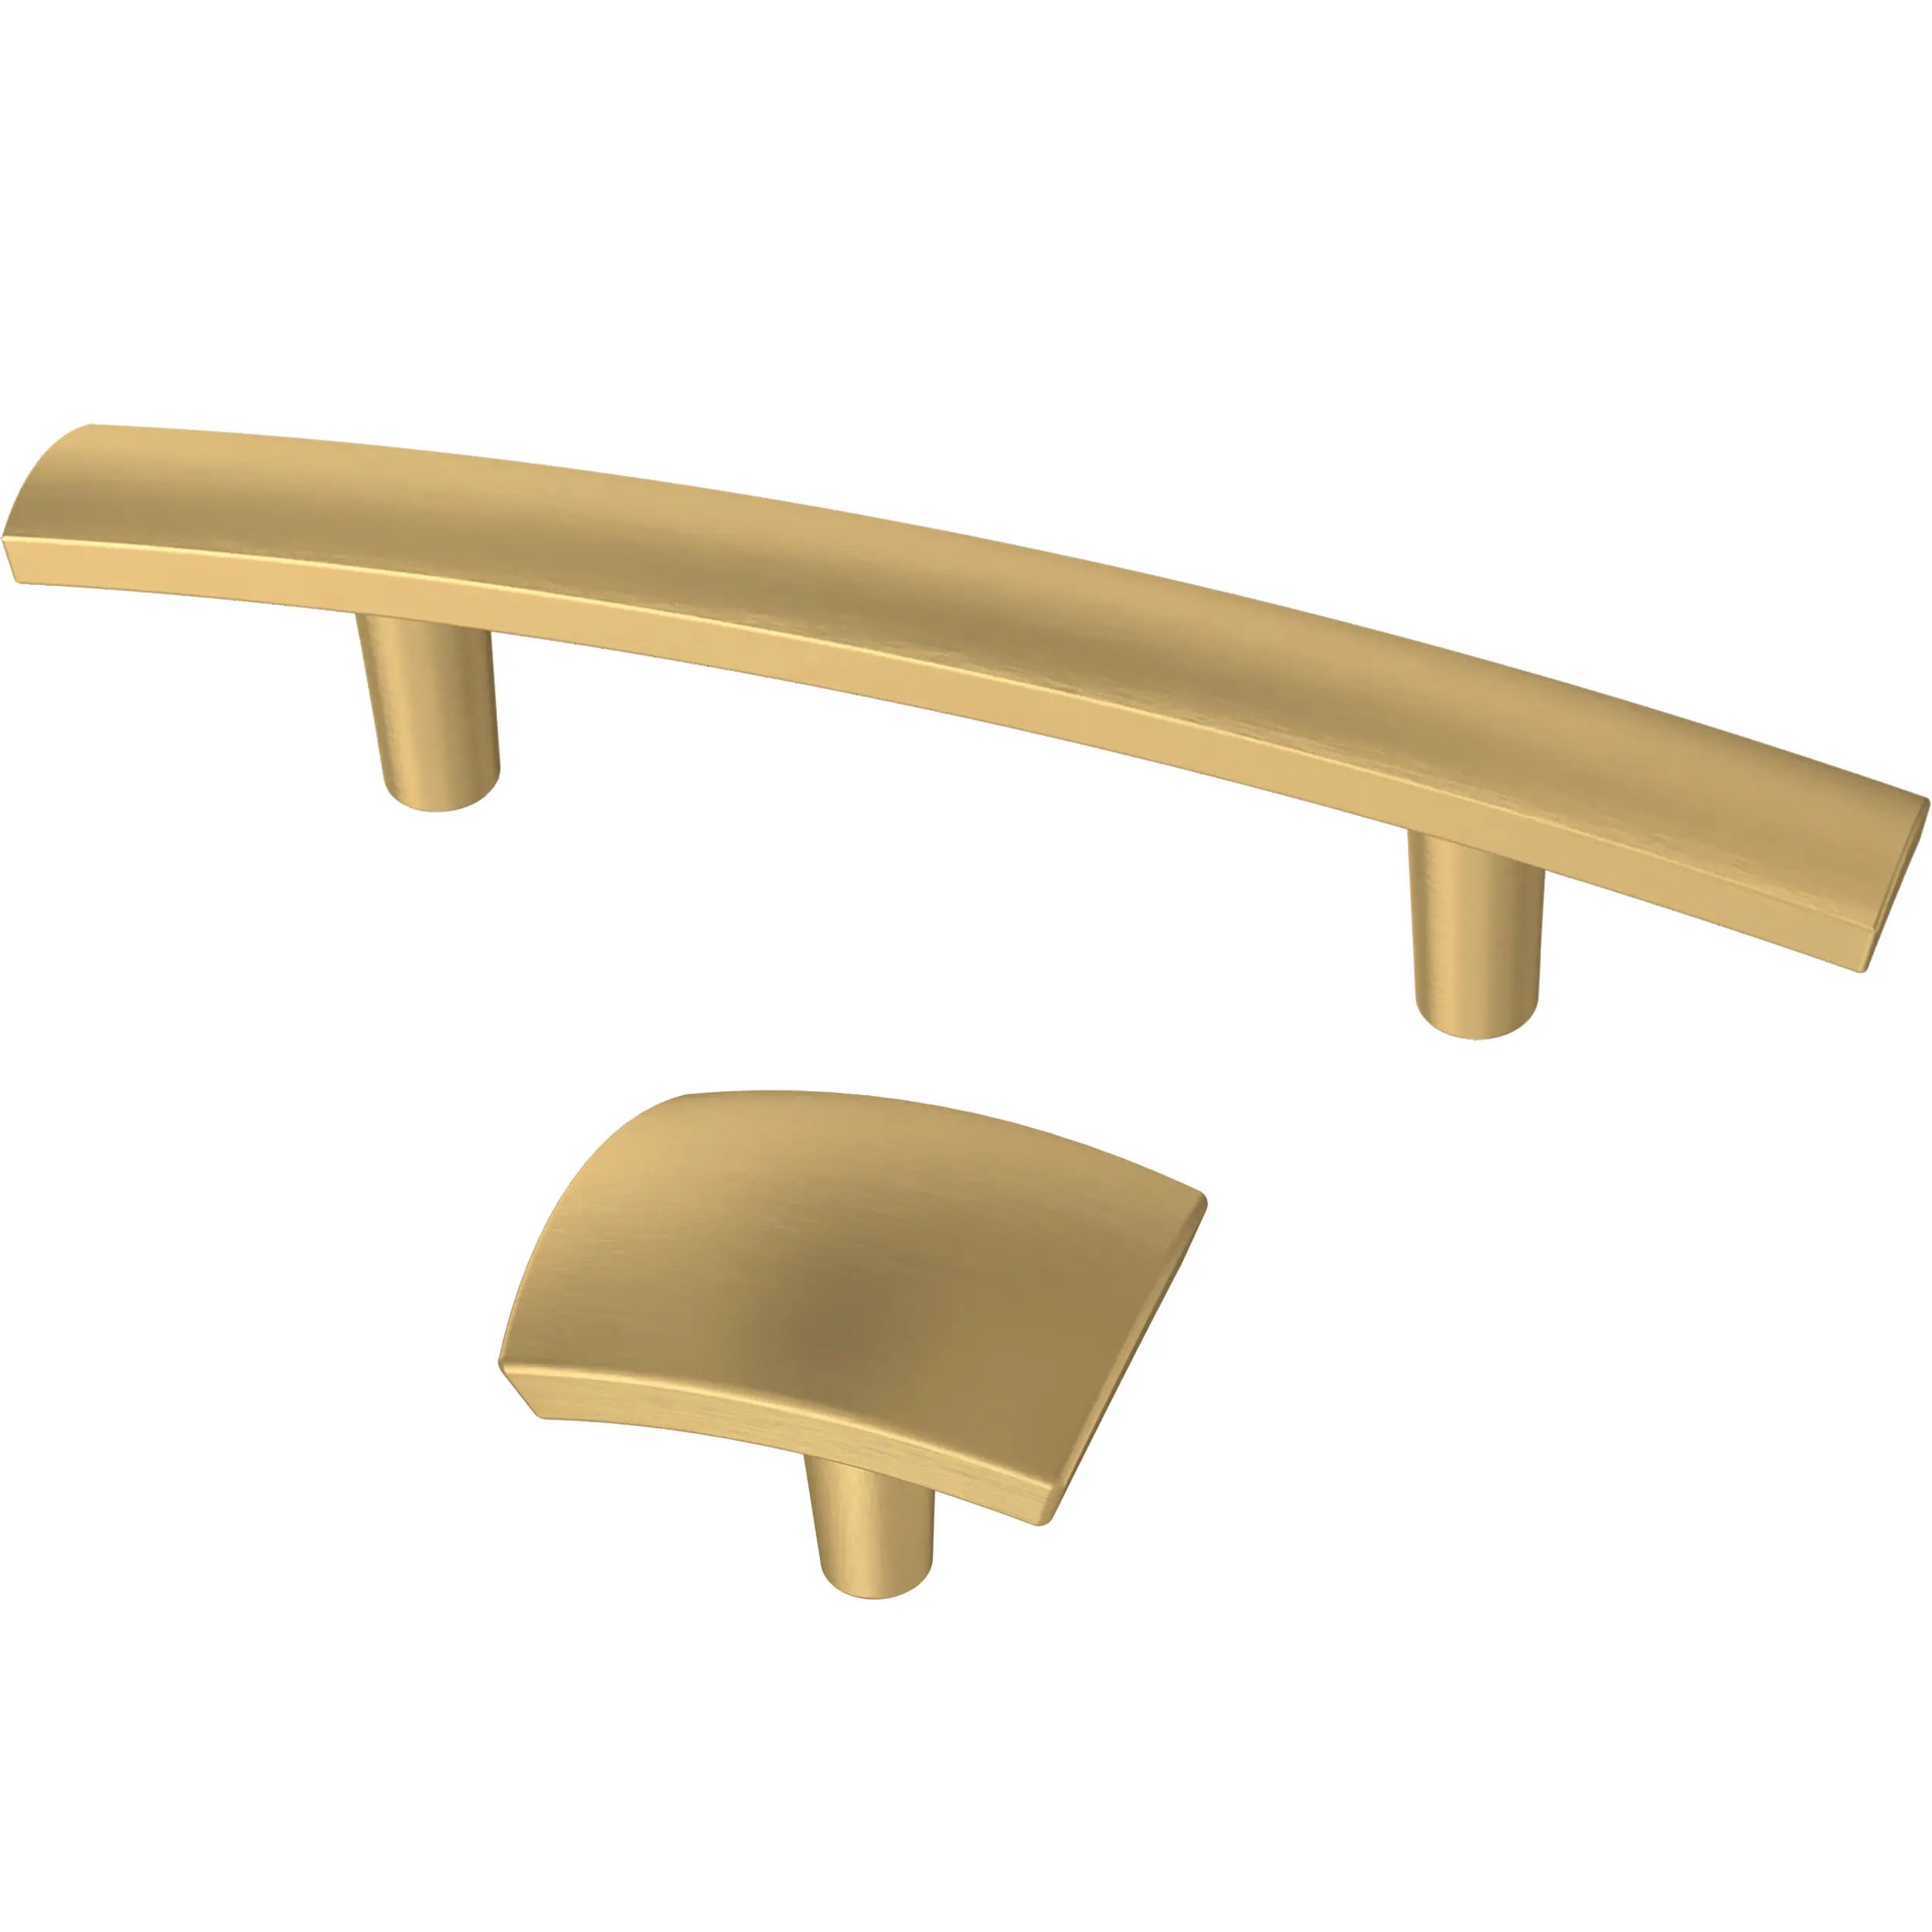 Brainerd Caroline 3 Brushed Brass Cabinet Hardware Collection at Lowes.com | Lowe's